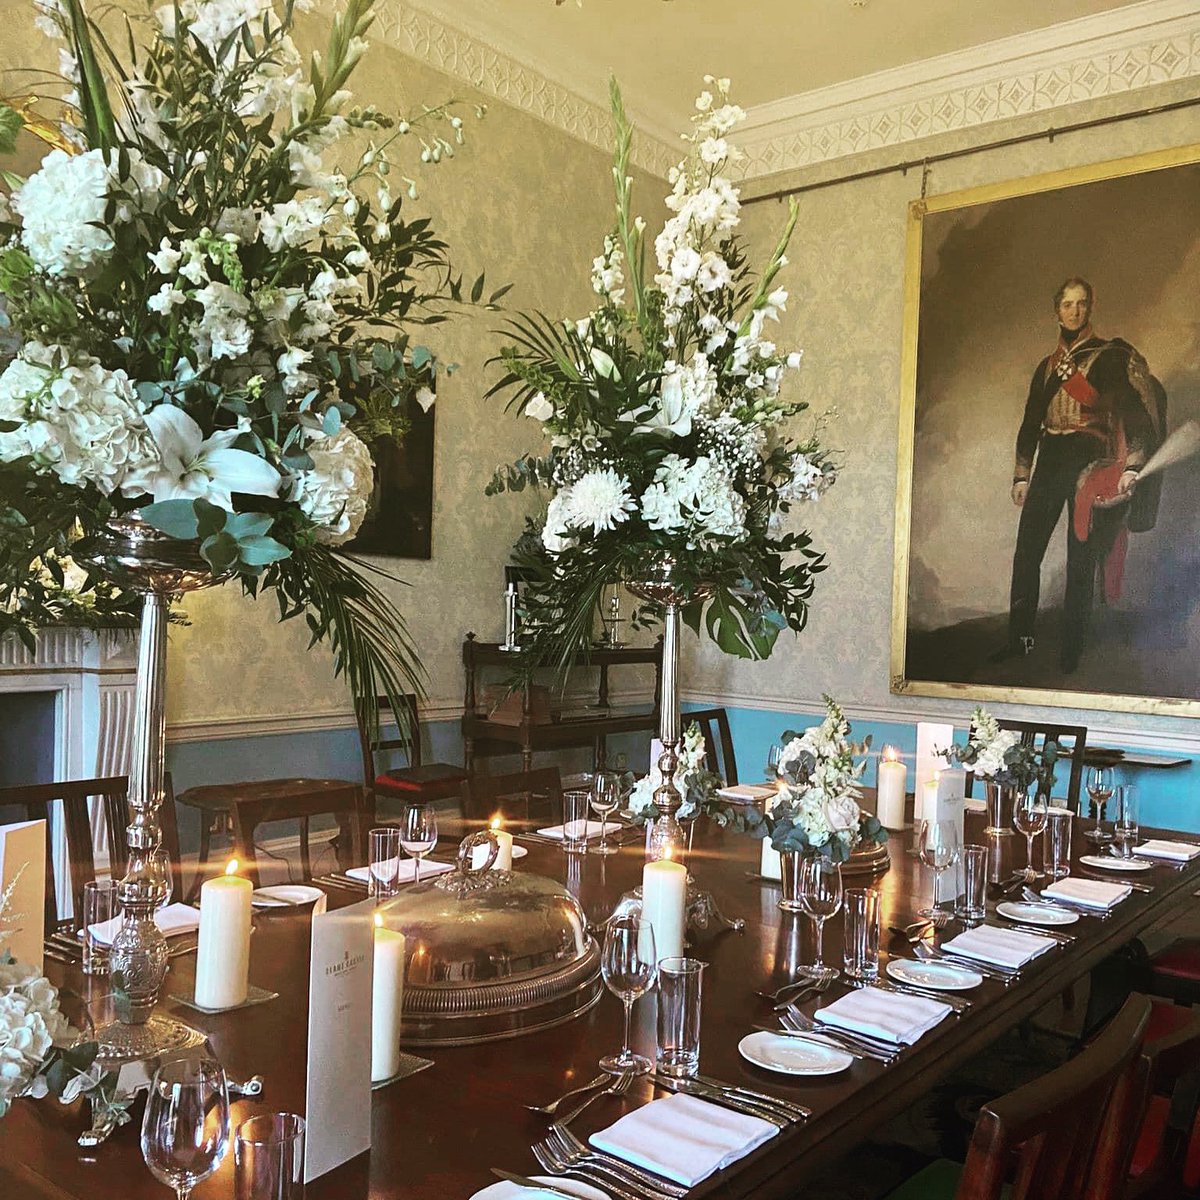 Our dining room is ideal for intimate dinners 💍 Email events@slanecastle.ie to plan your special occasion. #slane #diningatthecastle #boynevalley #slanecastle